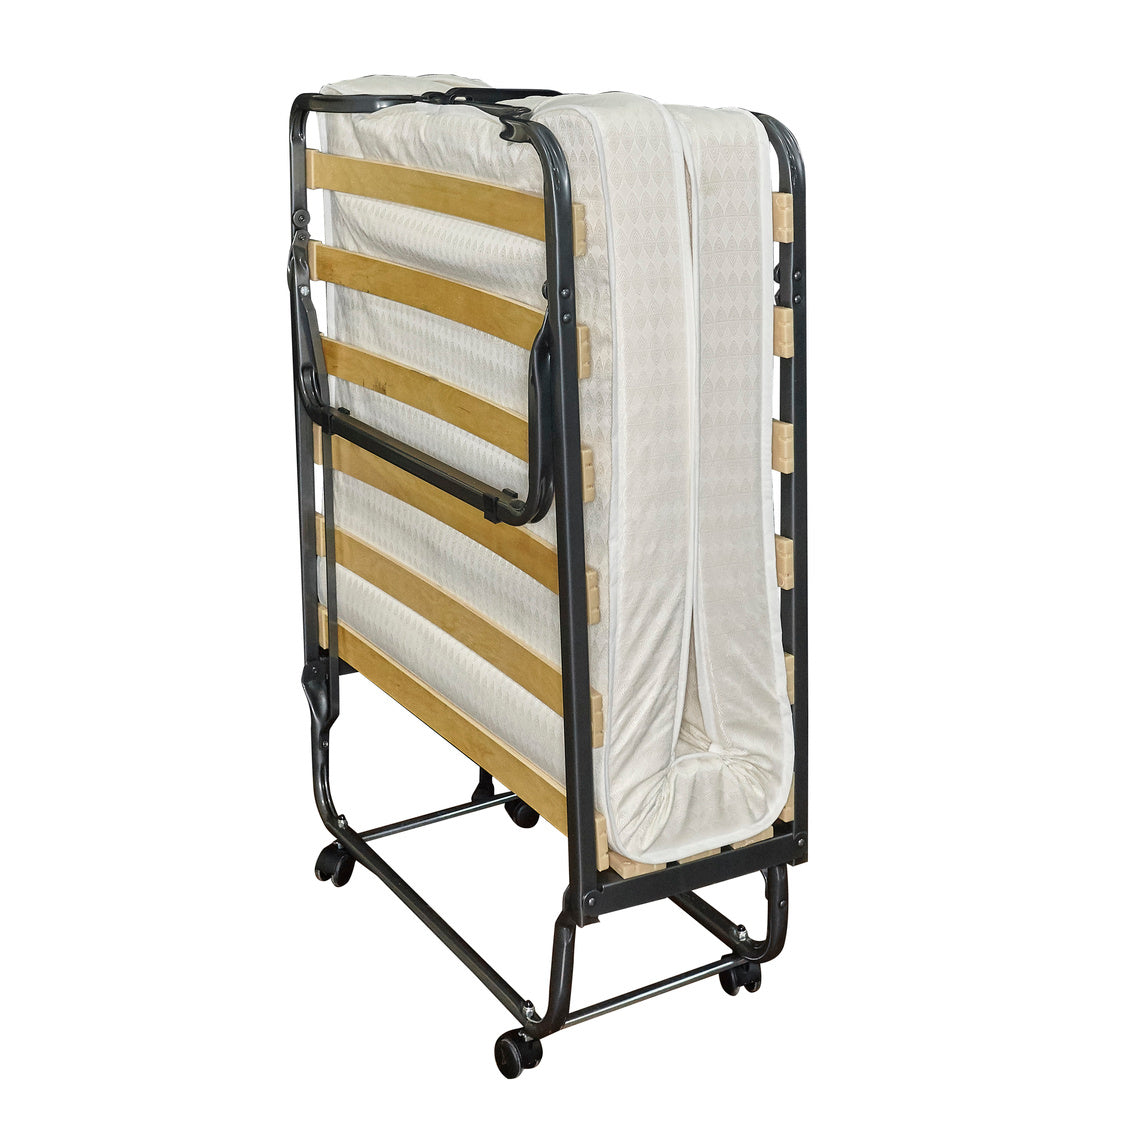 Luxor Folding Bed with Memory Foam